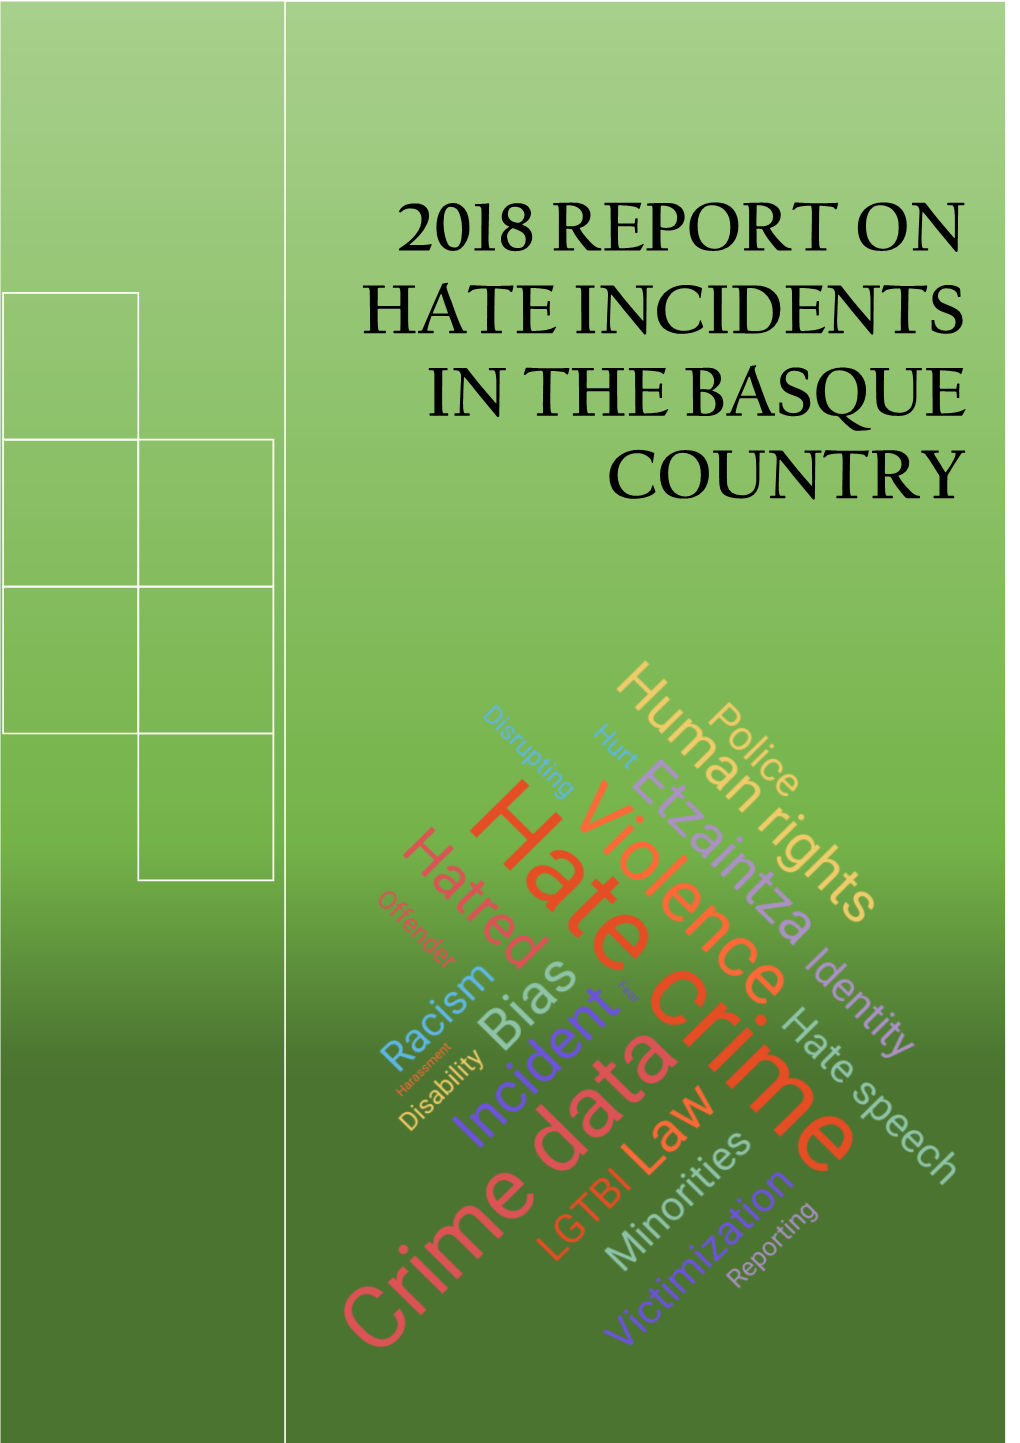 Hate Incidents in the Basque Country 2018